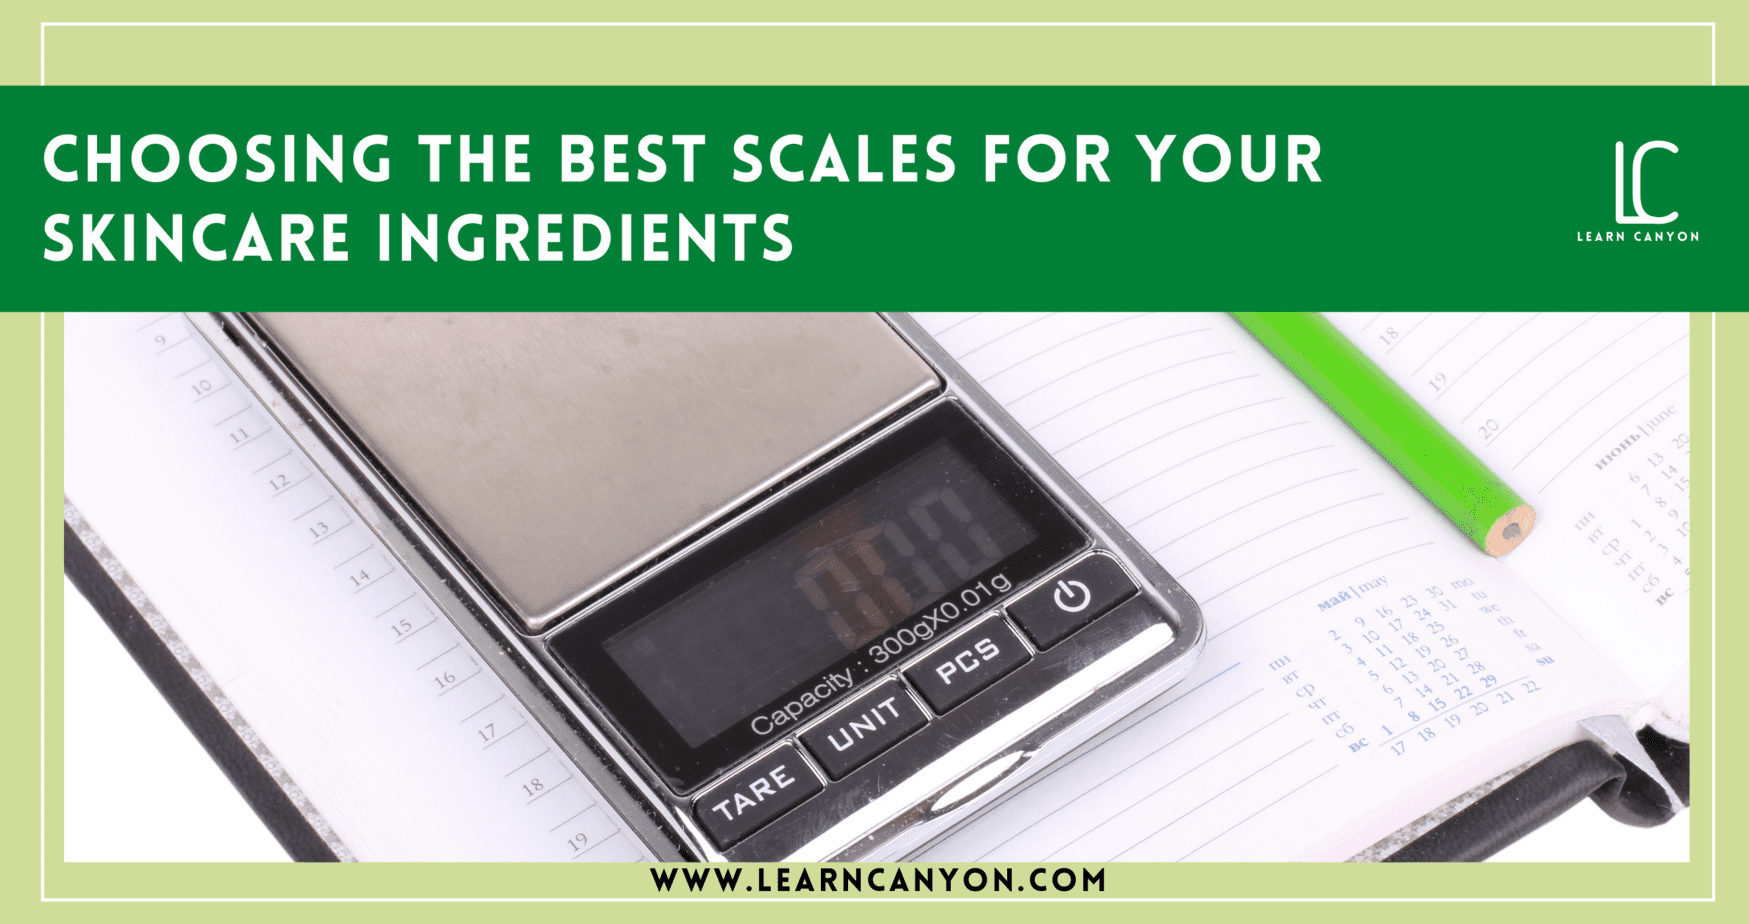 Choosing the Right Scale to Weigh Spices, Herbs and Other Ingredients